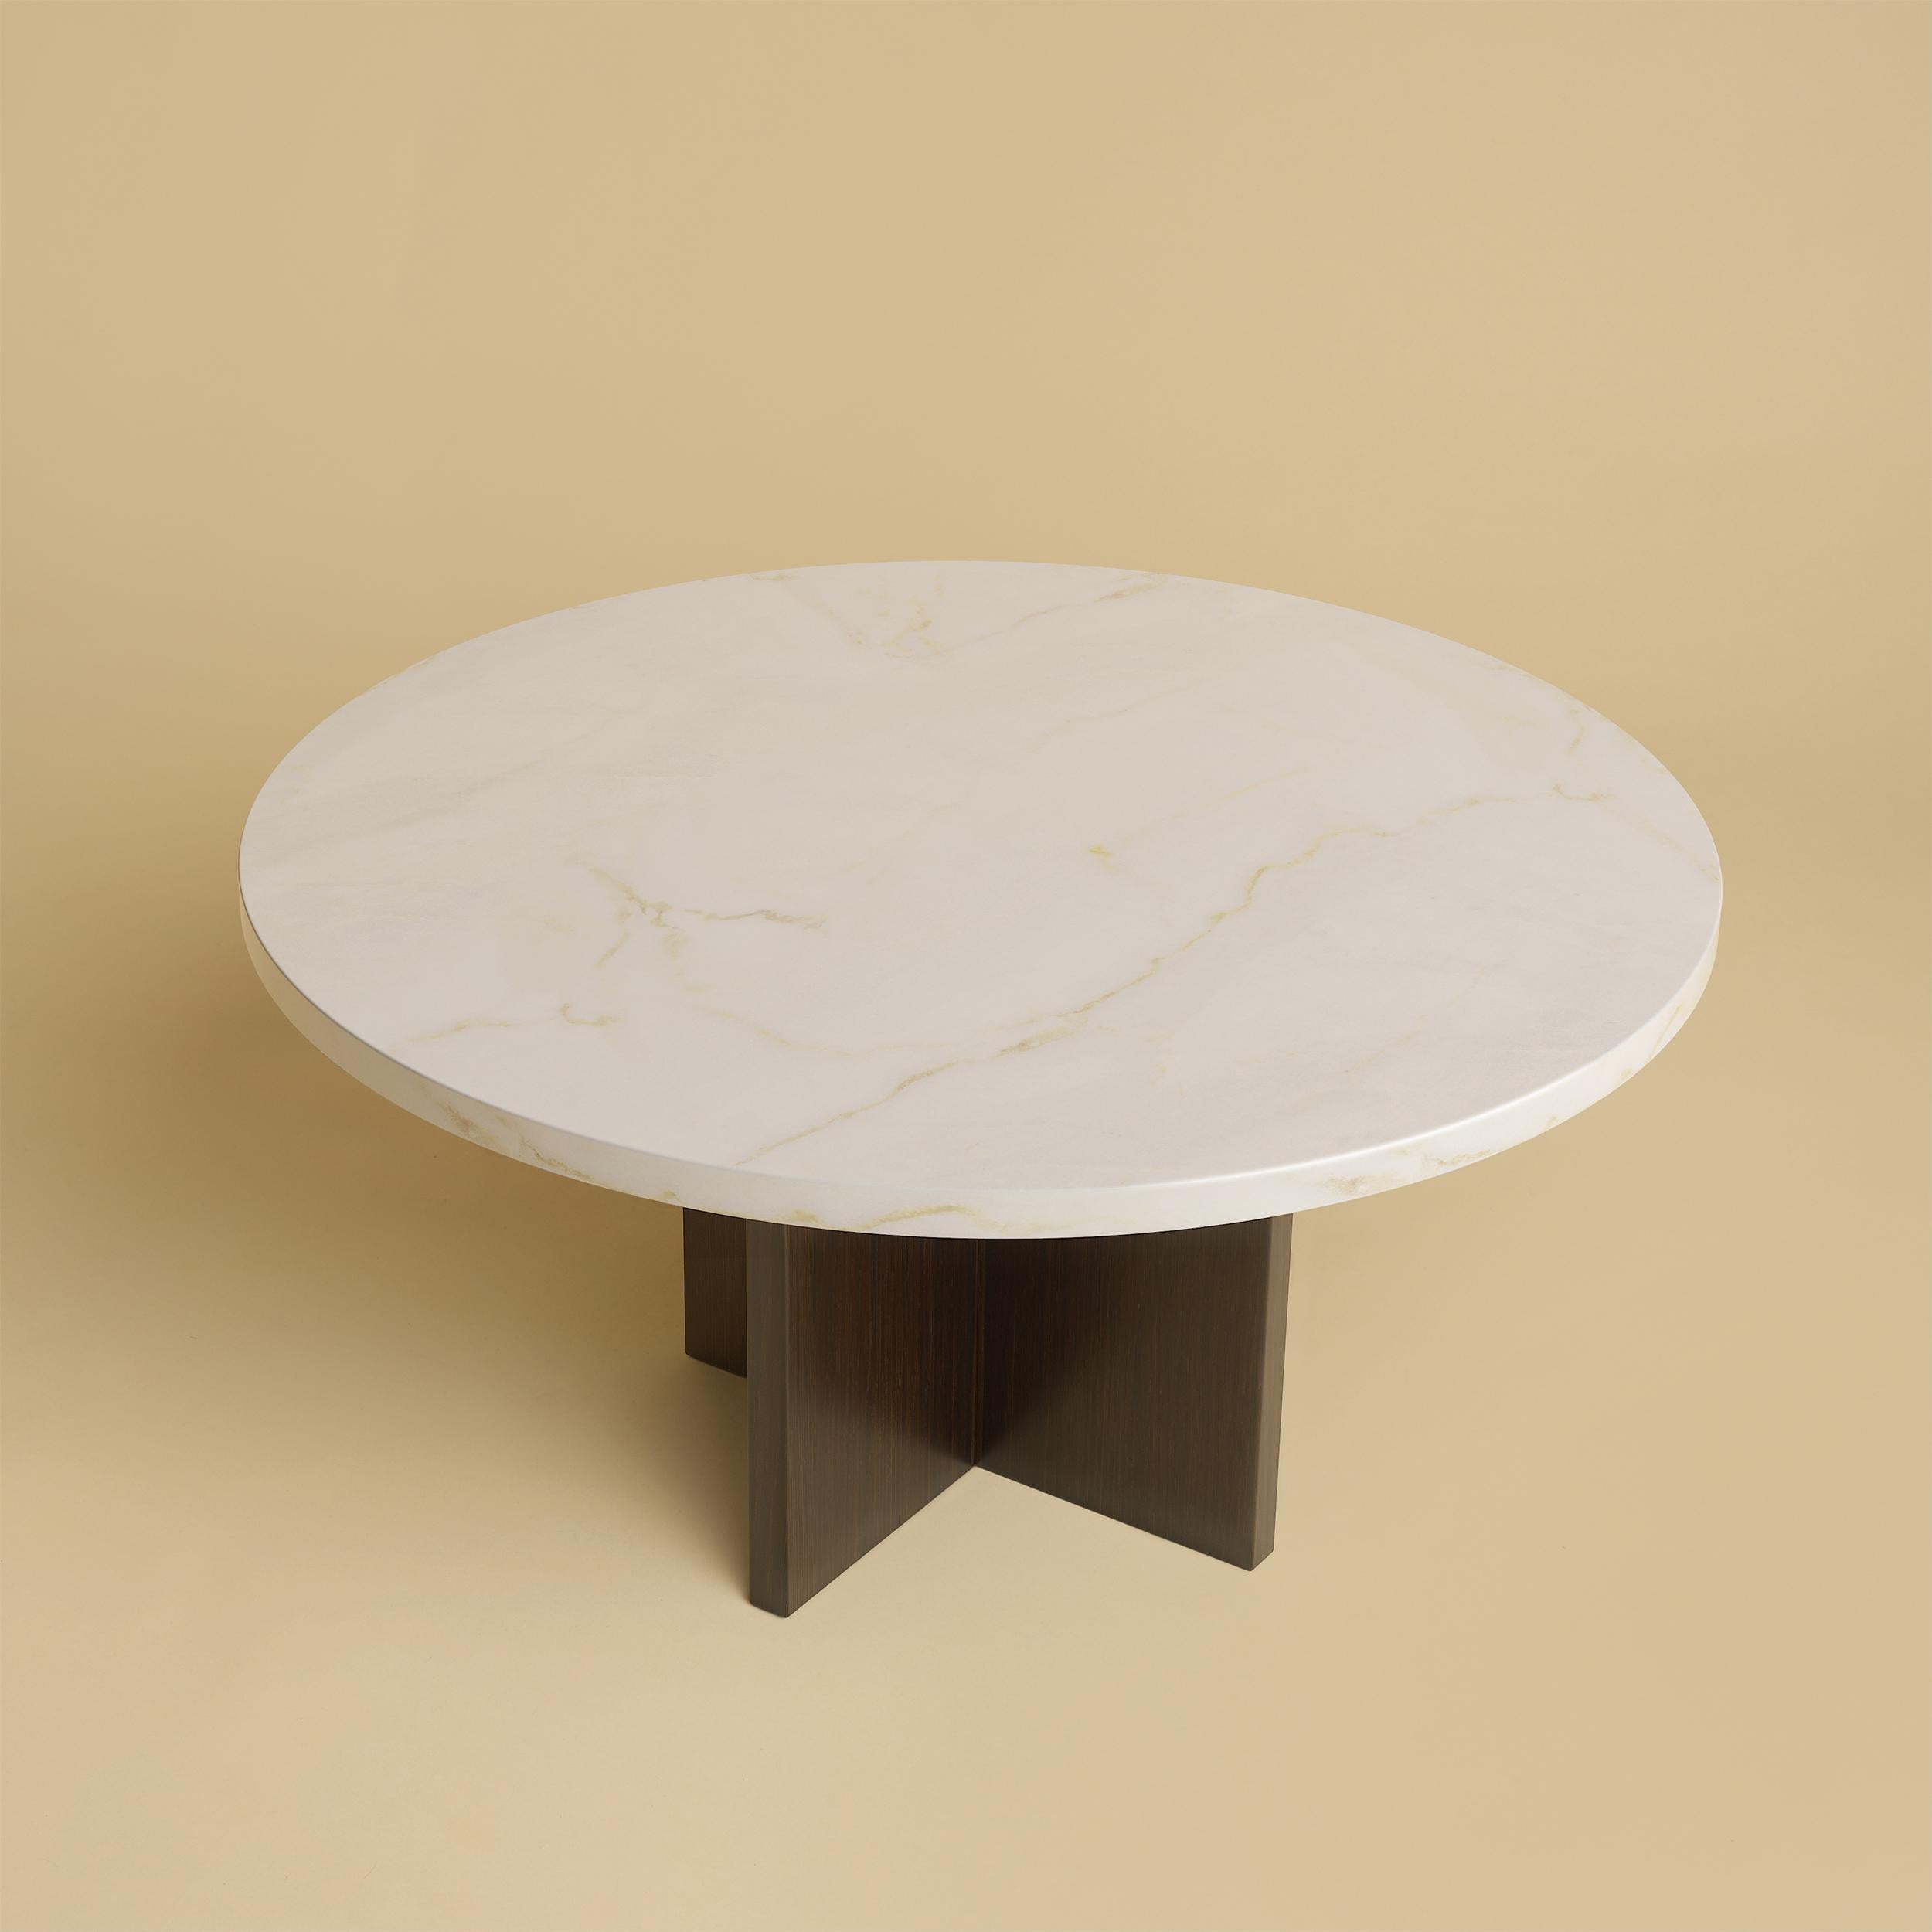 The Tinian coffee table is produced with an oak wood base and Carrara Gold marble top from Tuscany caves . The top is circular and 60cm in diameter, while the base is obtained by gluing oak planks perpendicular to each other.
Artisanal production